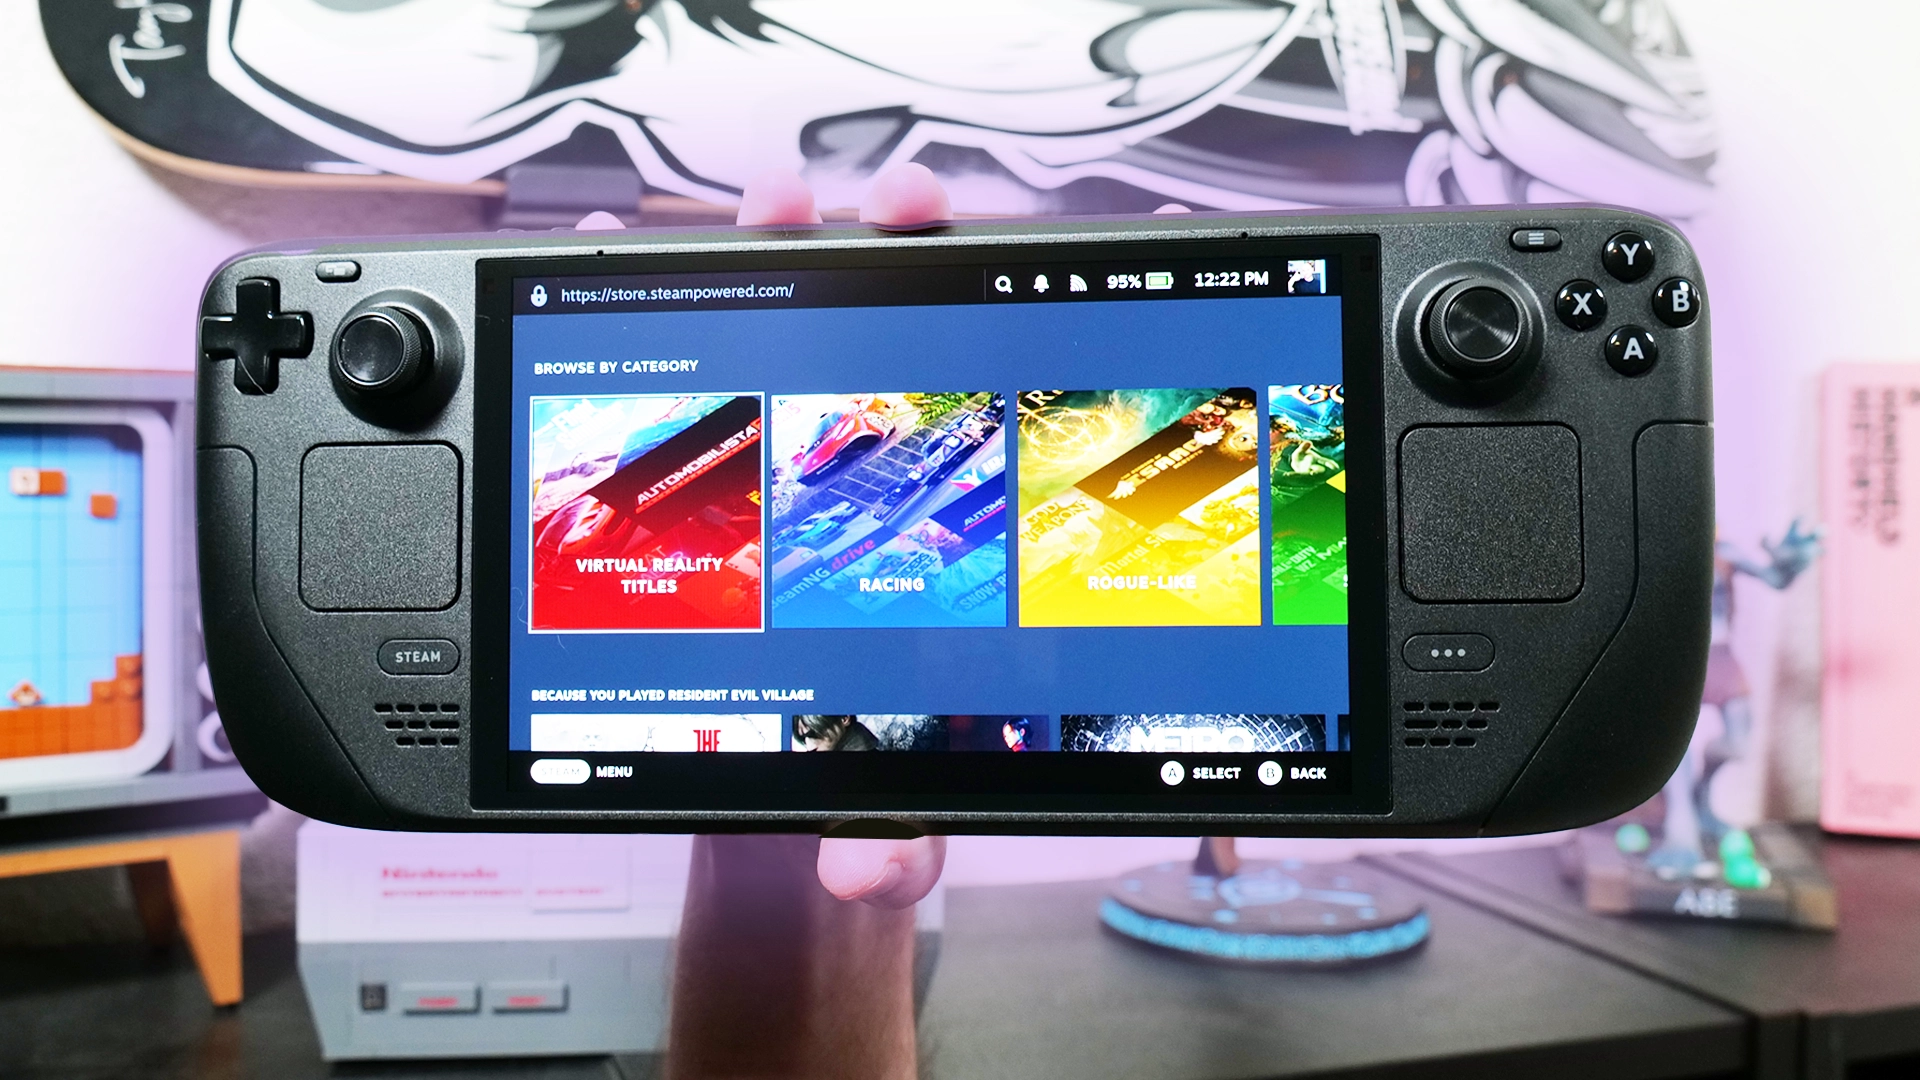 AYA-NEO, a handheld gaming PC, claims to be the “most powerful handheld  gaming device”